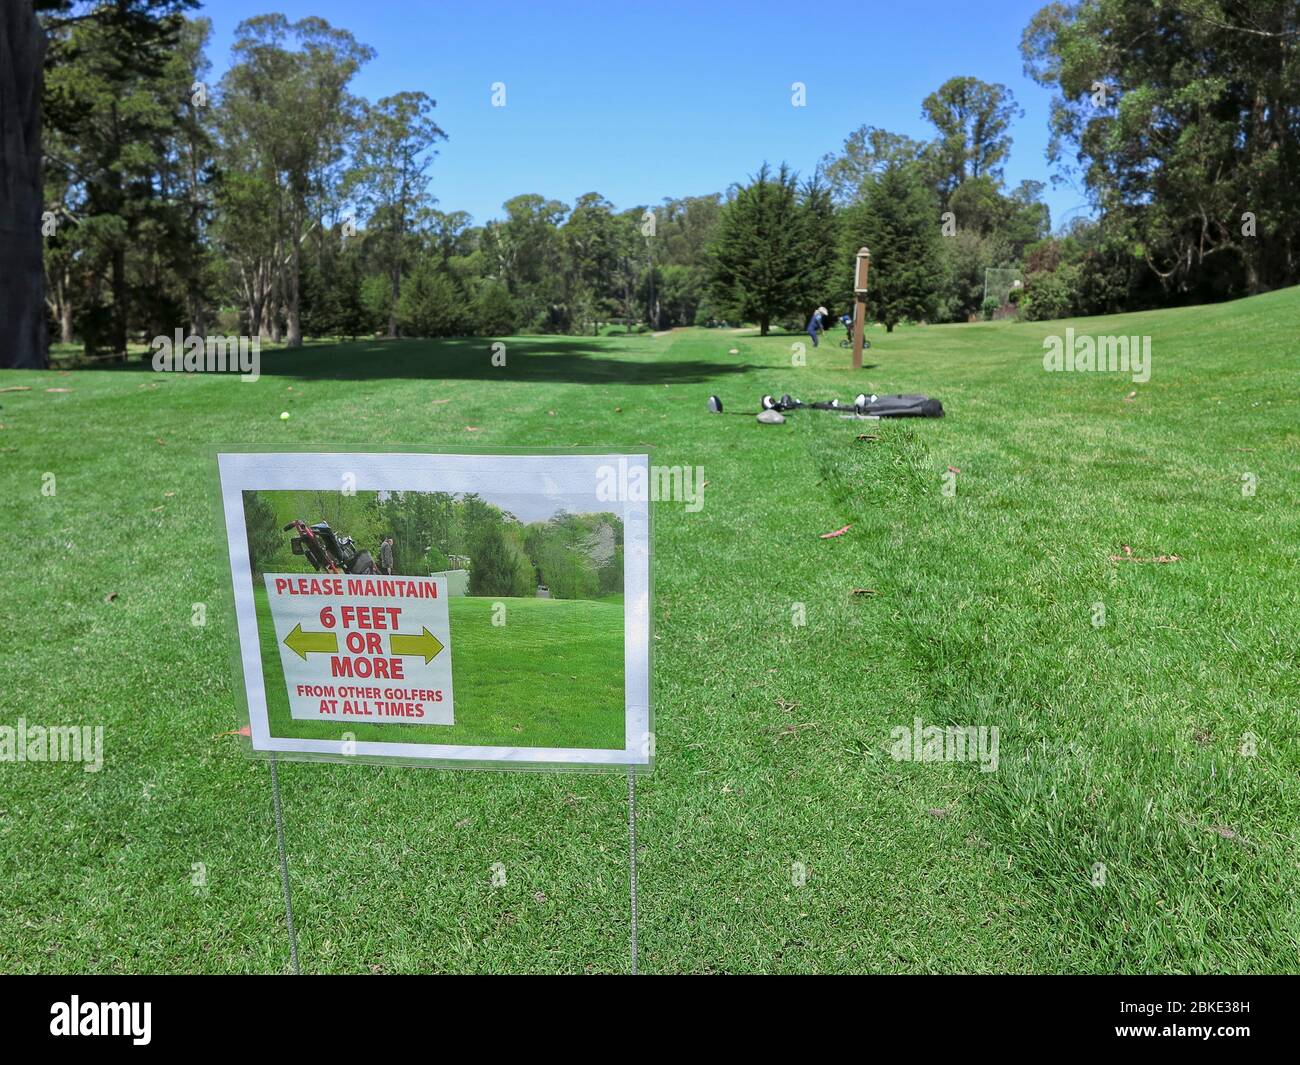 Santa Cuz, CA, USA. 3rd May, 2020. Golf re-starts in California before restrictions are totally lifted post Coronavirus pandemic. Golfers must stay 6 feet apart and play in two balls, no cart sharing and no picking balls out of the hole. Credit: Motofoto/Alamy Live News Stock Photo